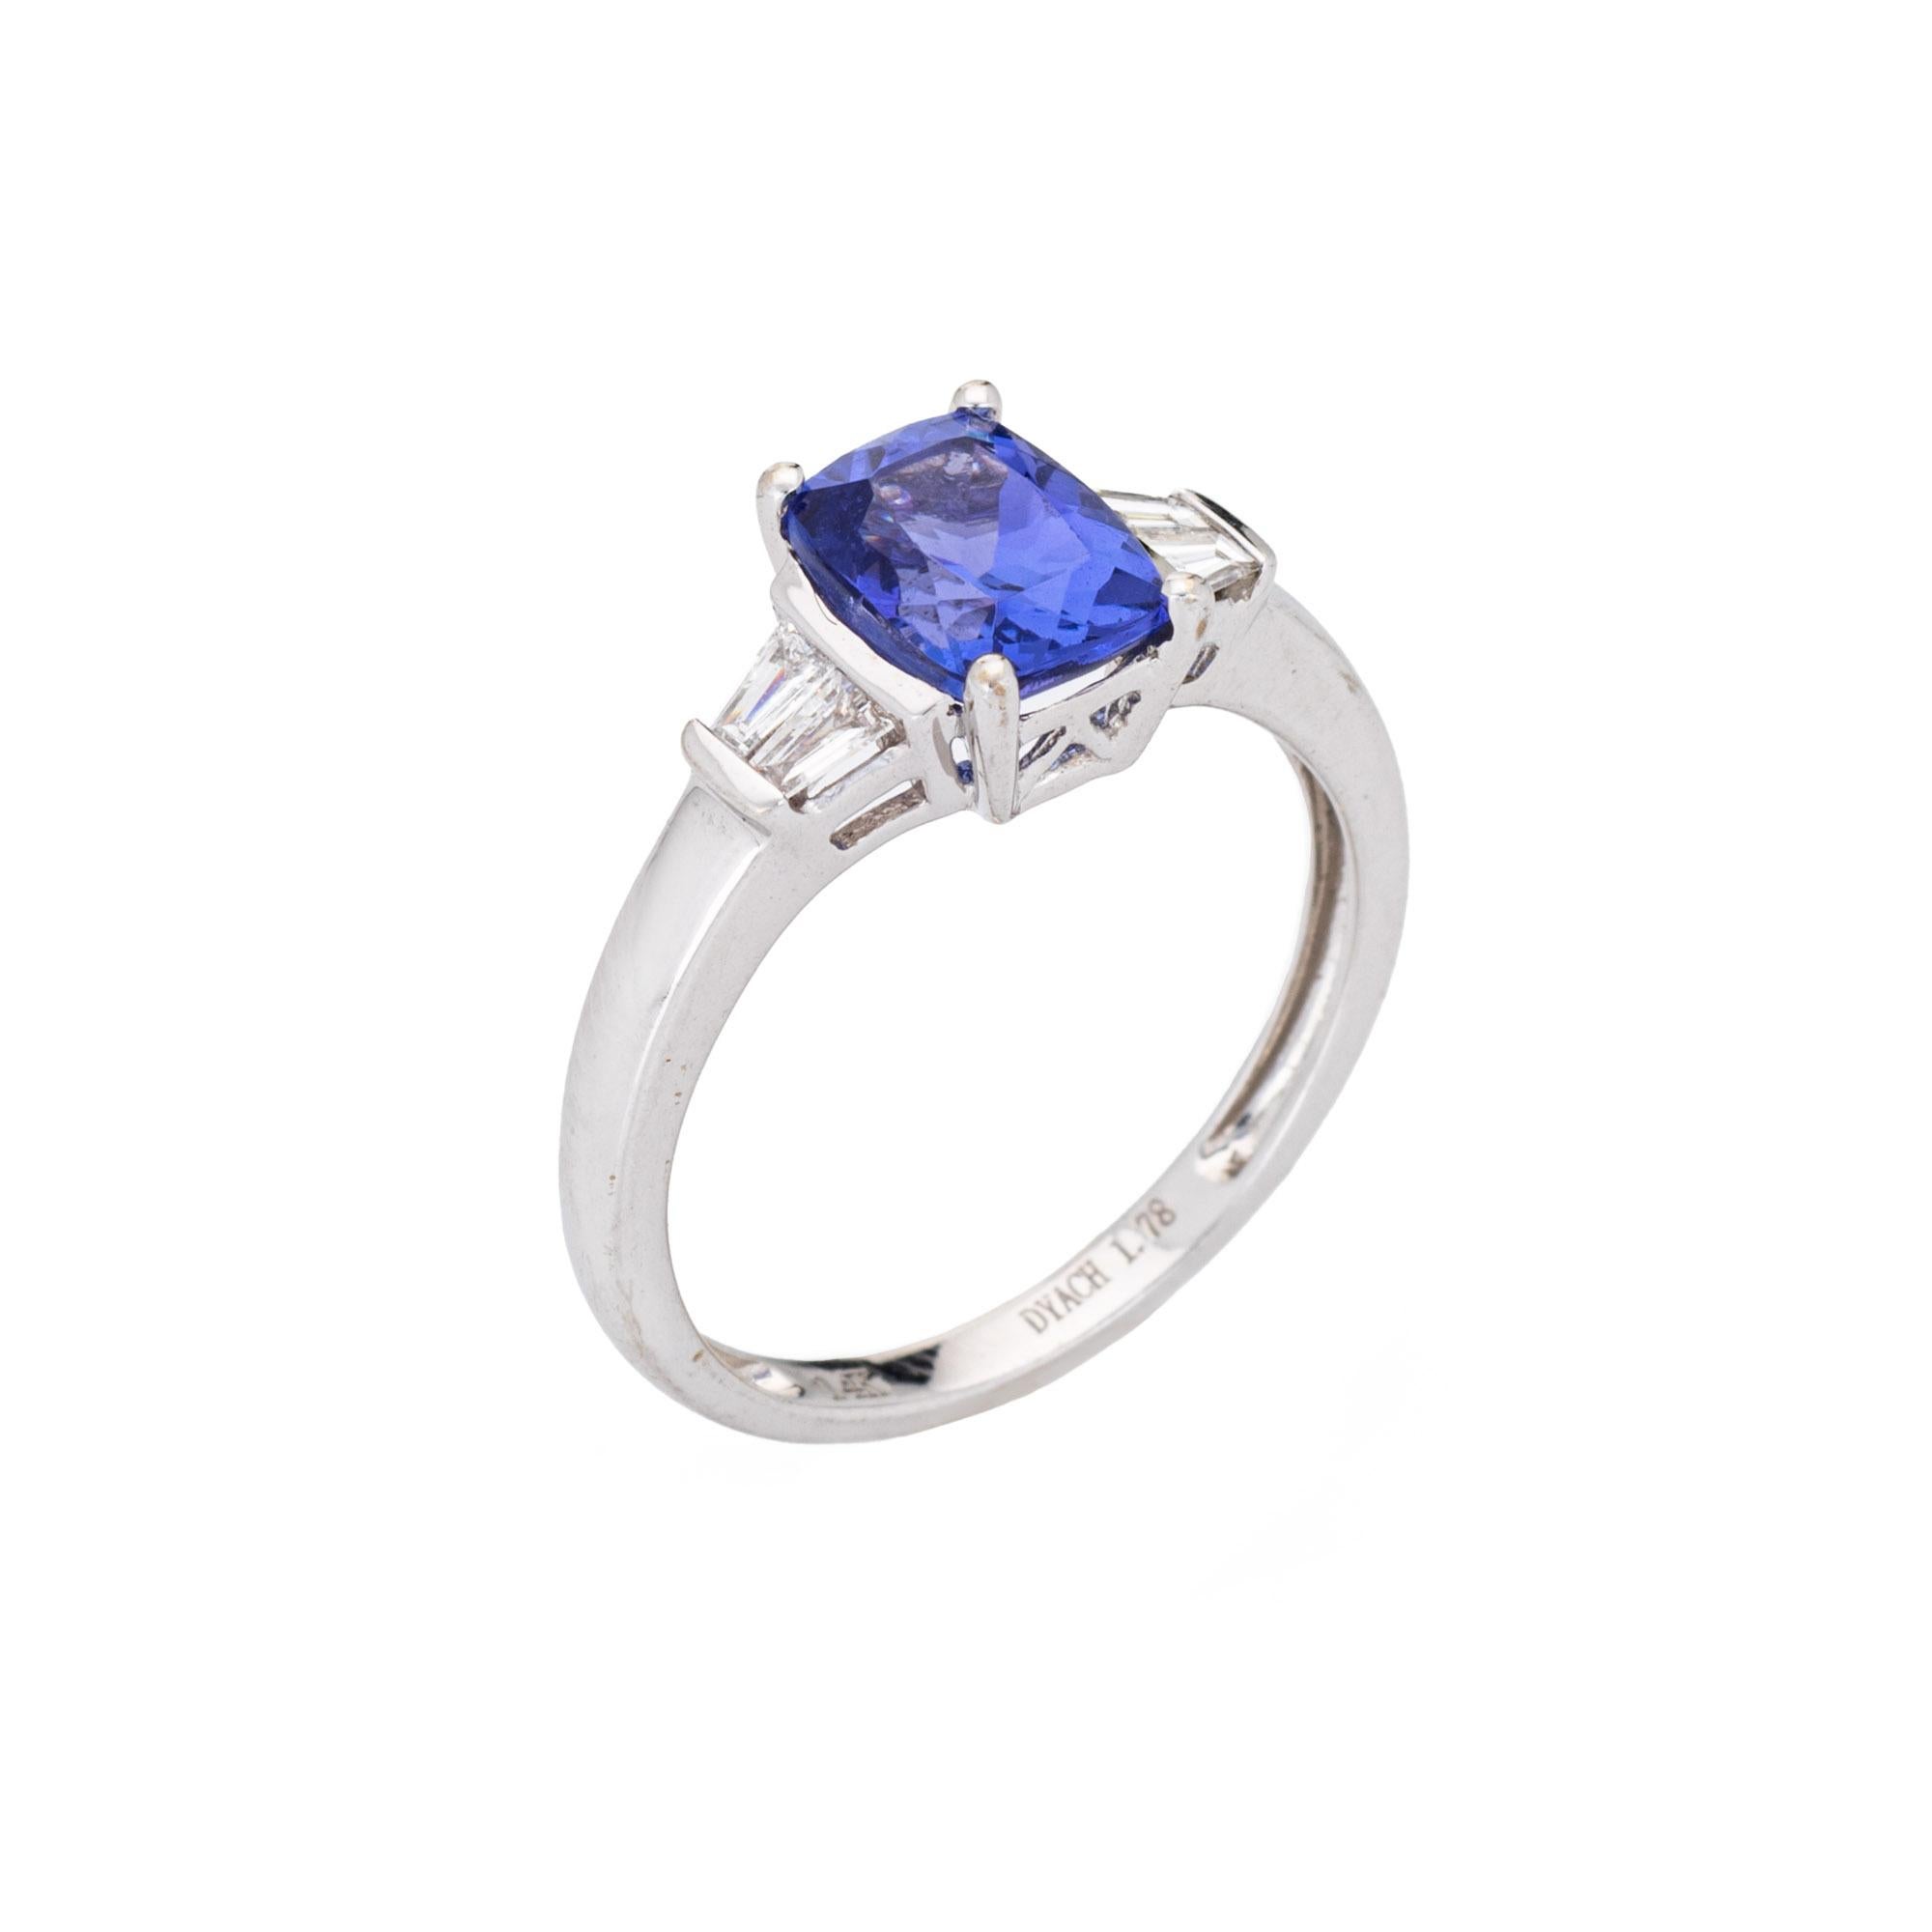 Stylish estate tanzanite & diamond ring crafted in 14 karat white gold. 

Cushion cut tanzanite measures 8mm x 6mm (1.78 carats). Four estimated 0.10 carat tapered baguette cut diamonds total an estimated 0.40 carats (estimated at G-H color and VS2